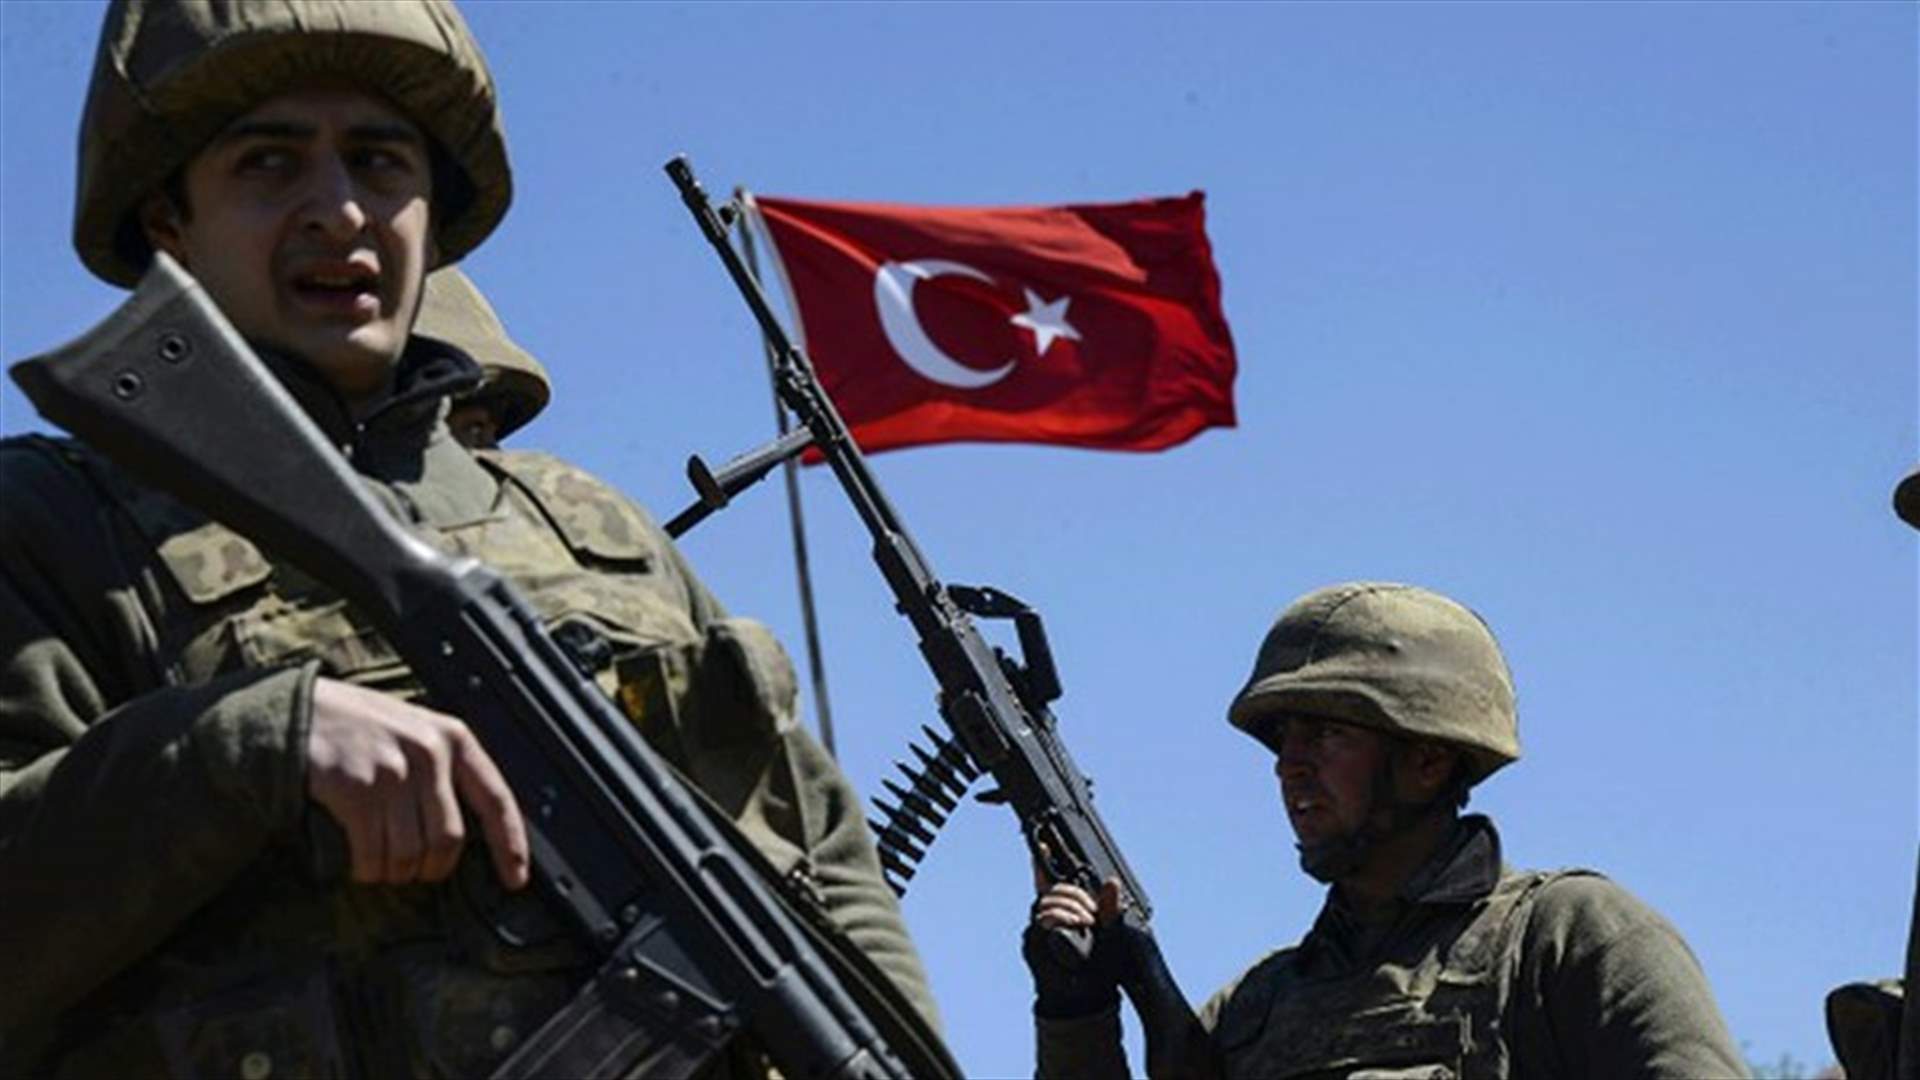 One Turkish soldier killed, 5 lightly wounded in clashes in Syria - military